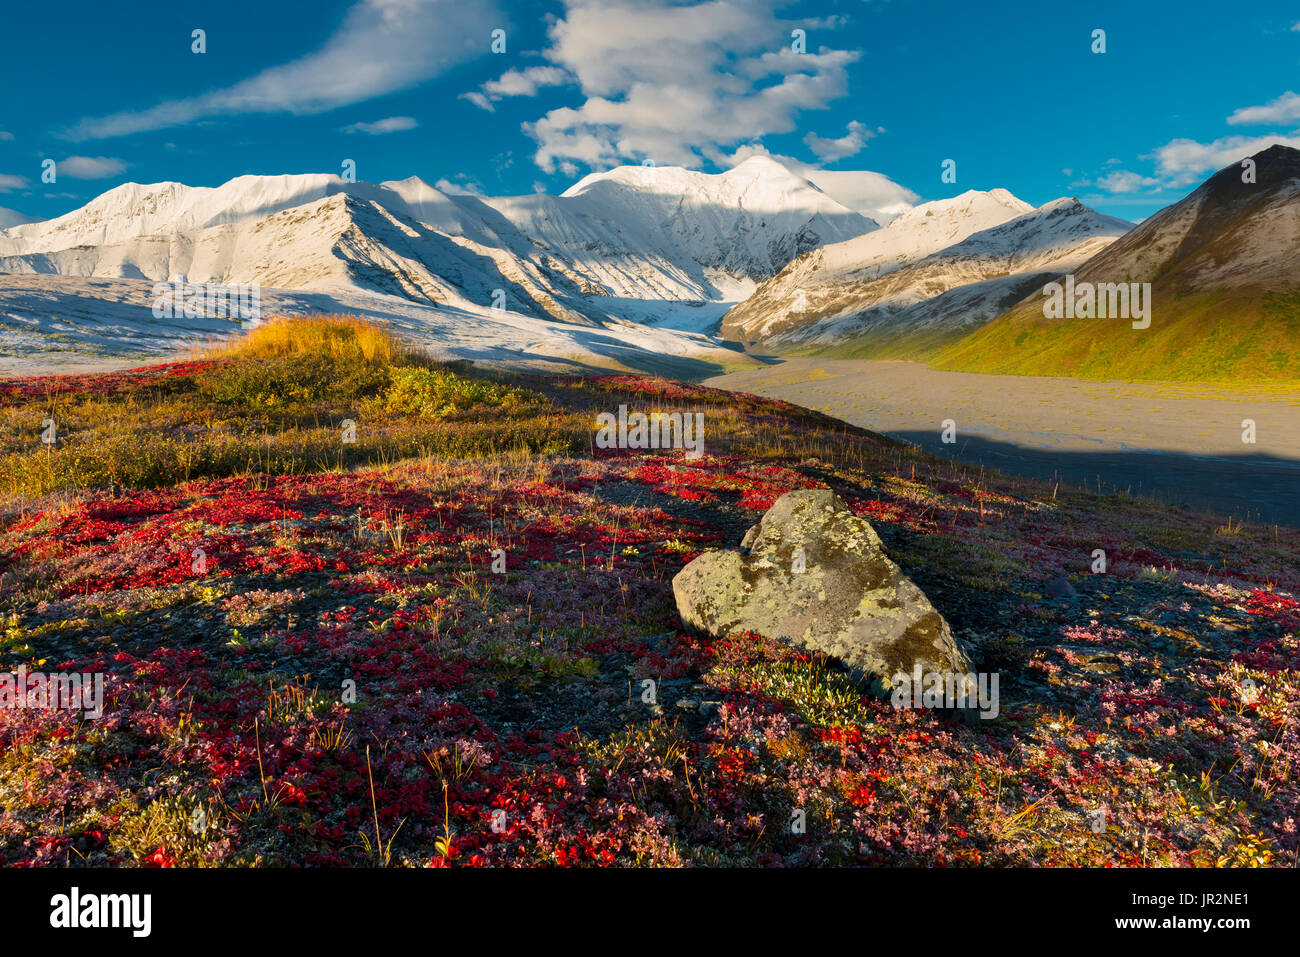 Scenic Autumn View Of The Snow Capped Alaska Range With Colorful Tundra In The Foreground, Interior Alaska, USA Stock Photo